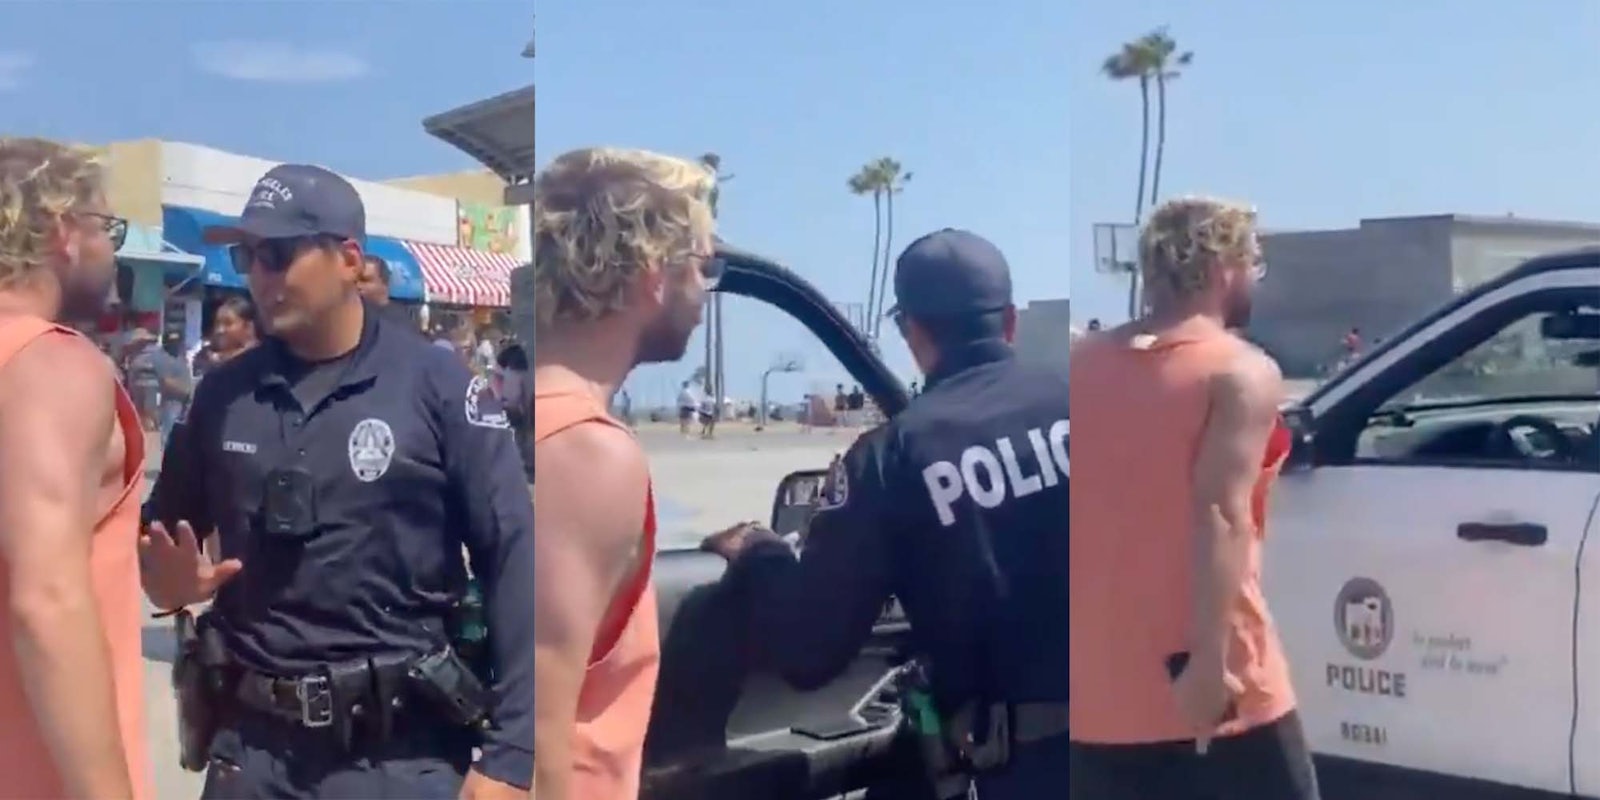 In a video posted to Twitter, a white man is seen pressuring an LAPD officer to get into his car after intimidating people on an LA boardwalk.